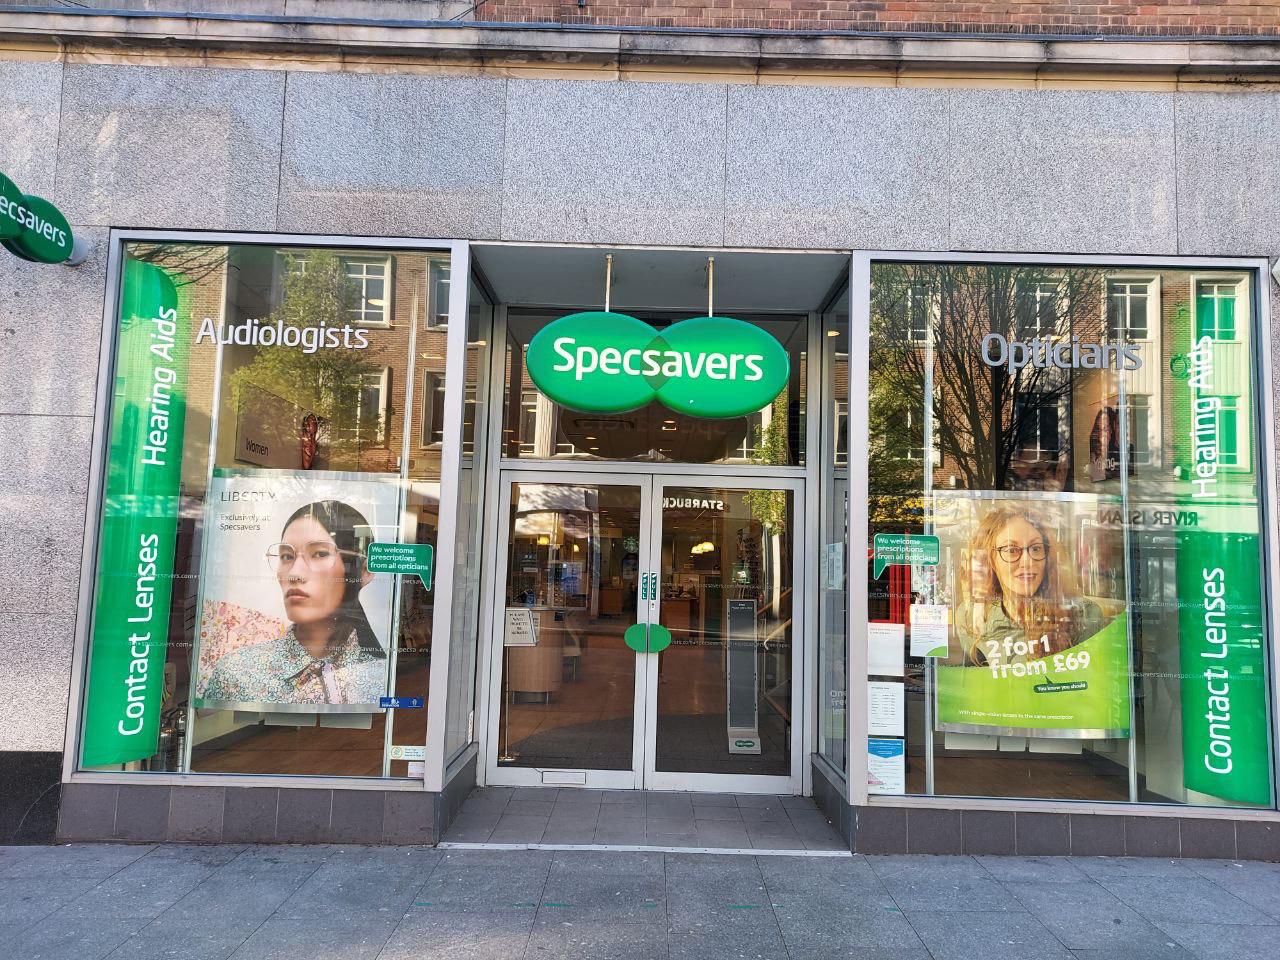 Images Specsavers Opticians and Audiologists - Exeter